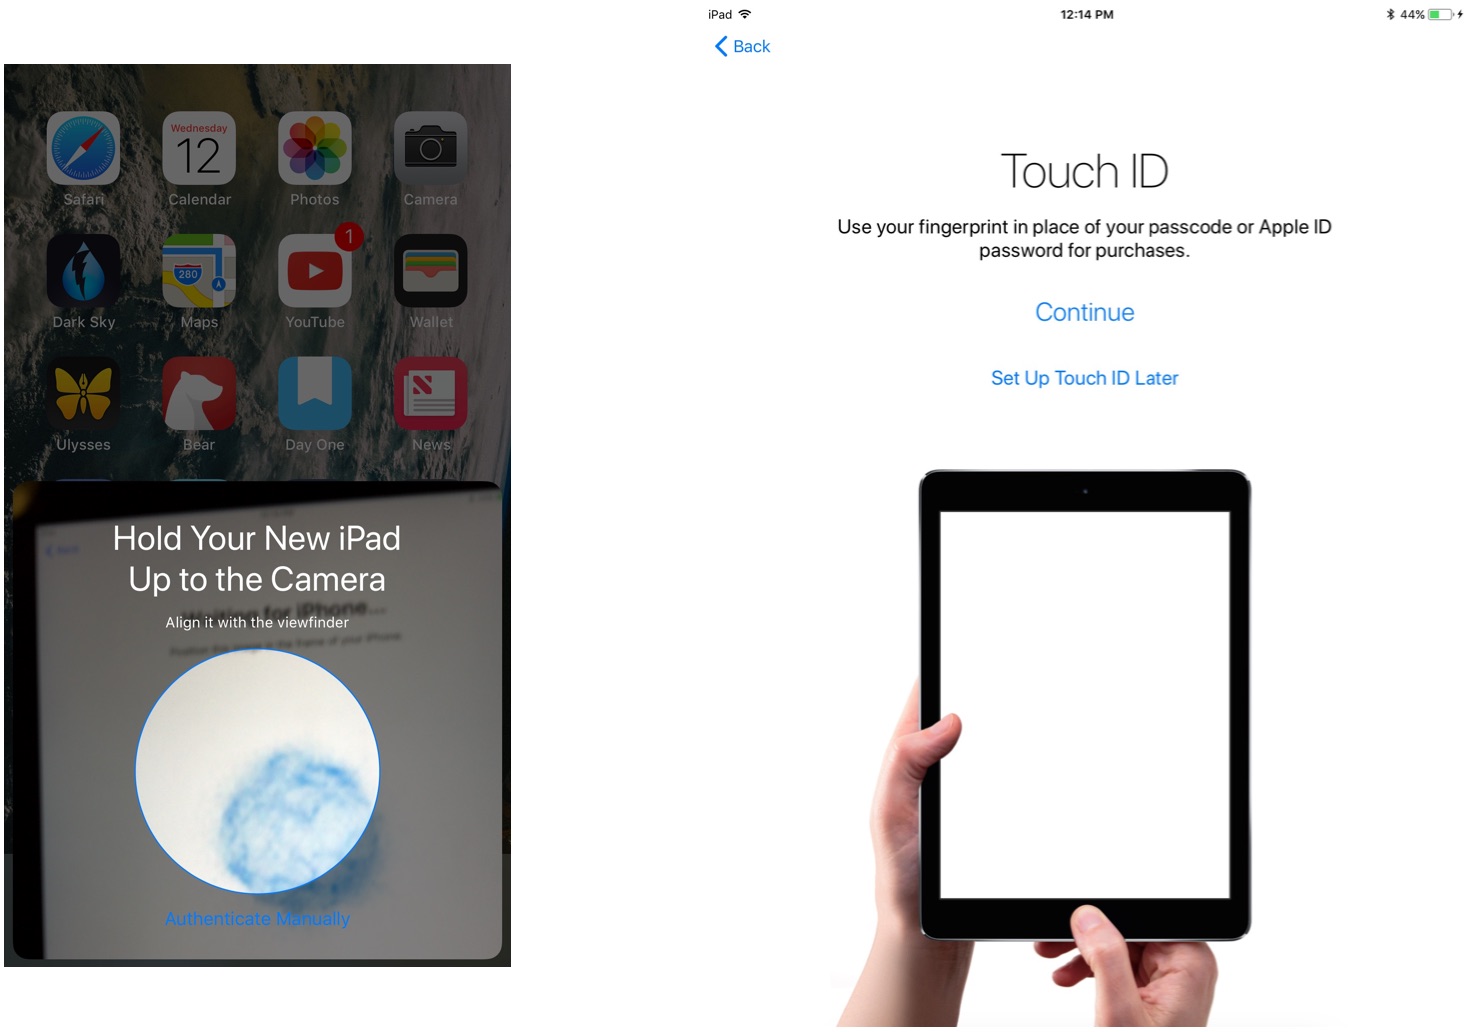 New iPhone setup steps showing the steps to scan the automatic setup code and then set up Touch ID